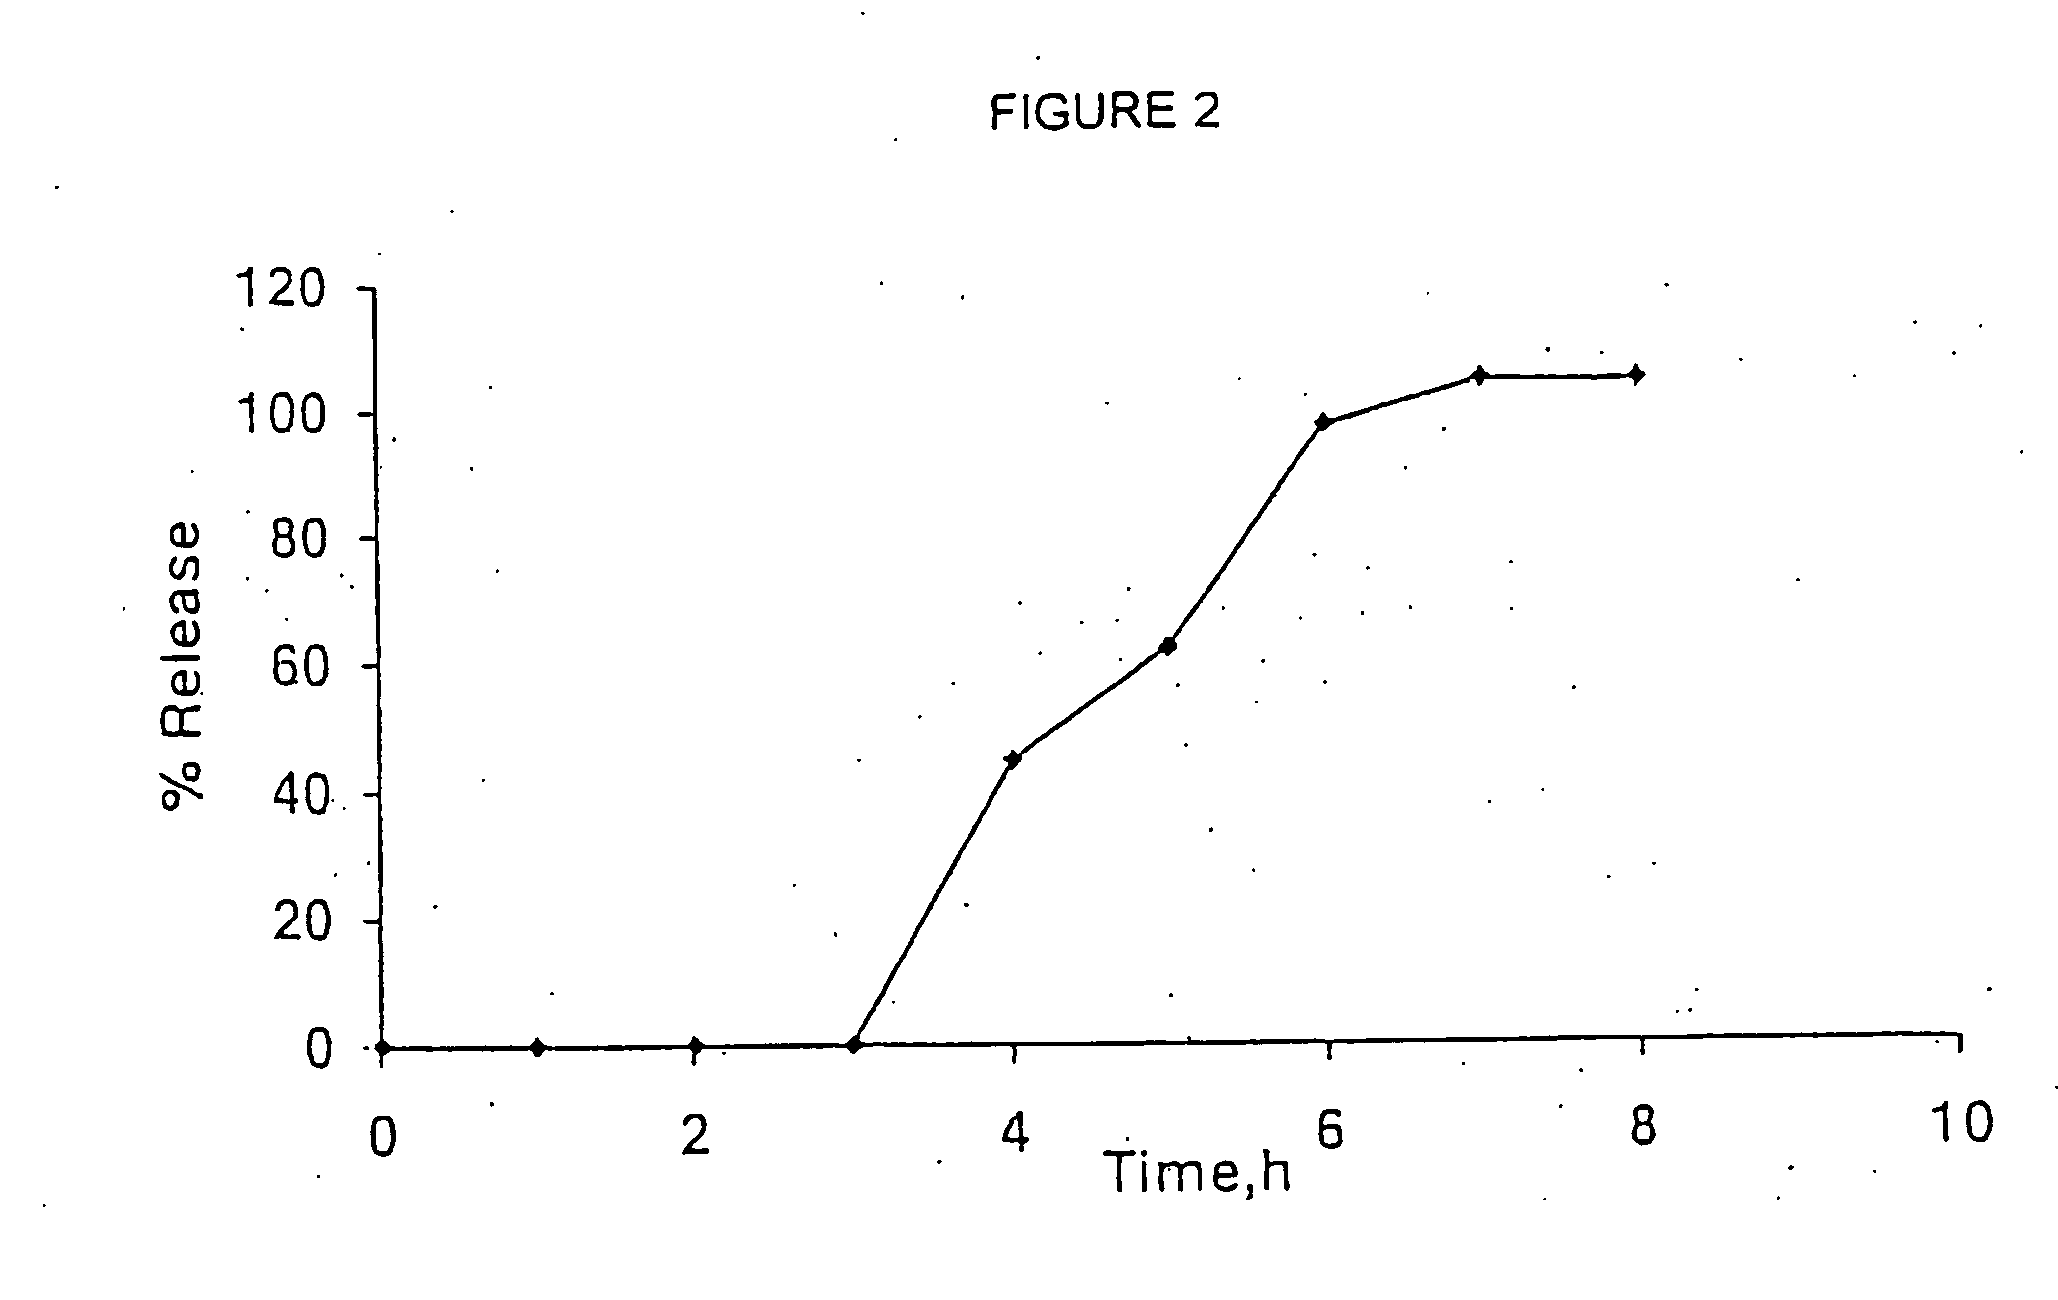 Pharmaceutical compositions containing venlafaxine